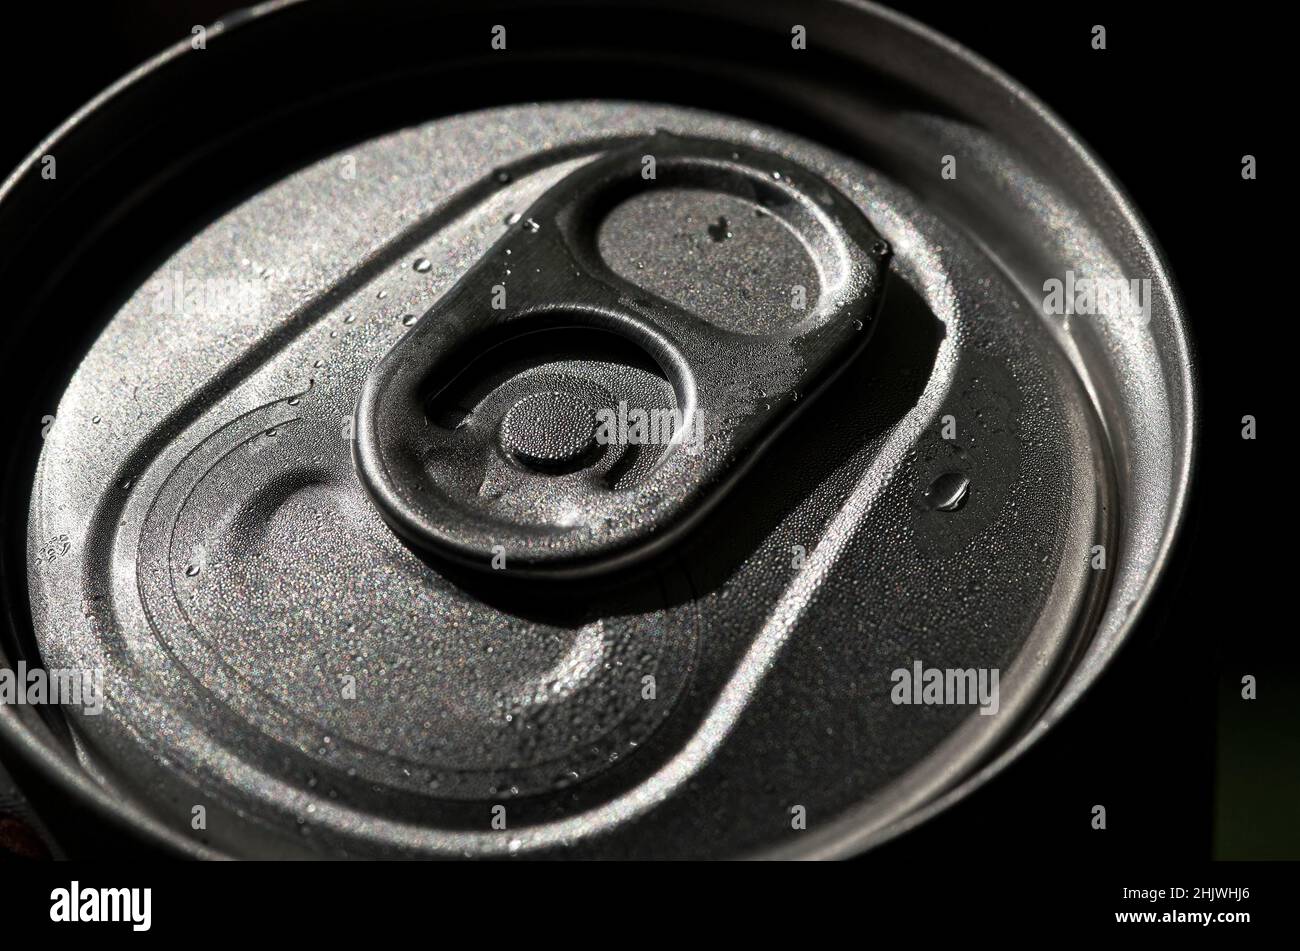 Top view of tab's ring on can of soda Stock Photo